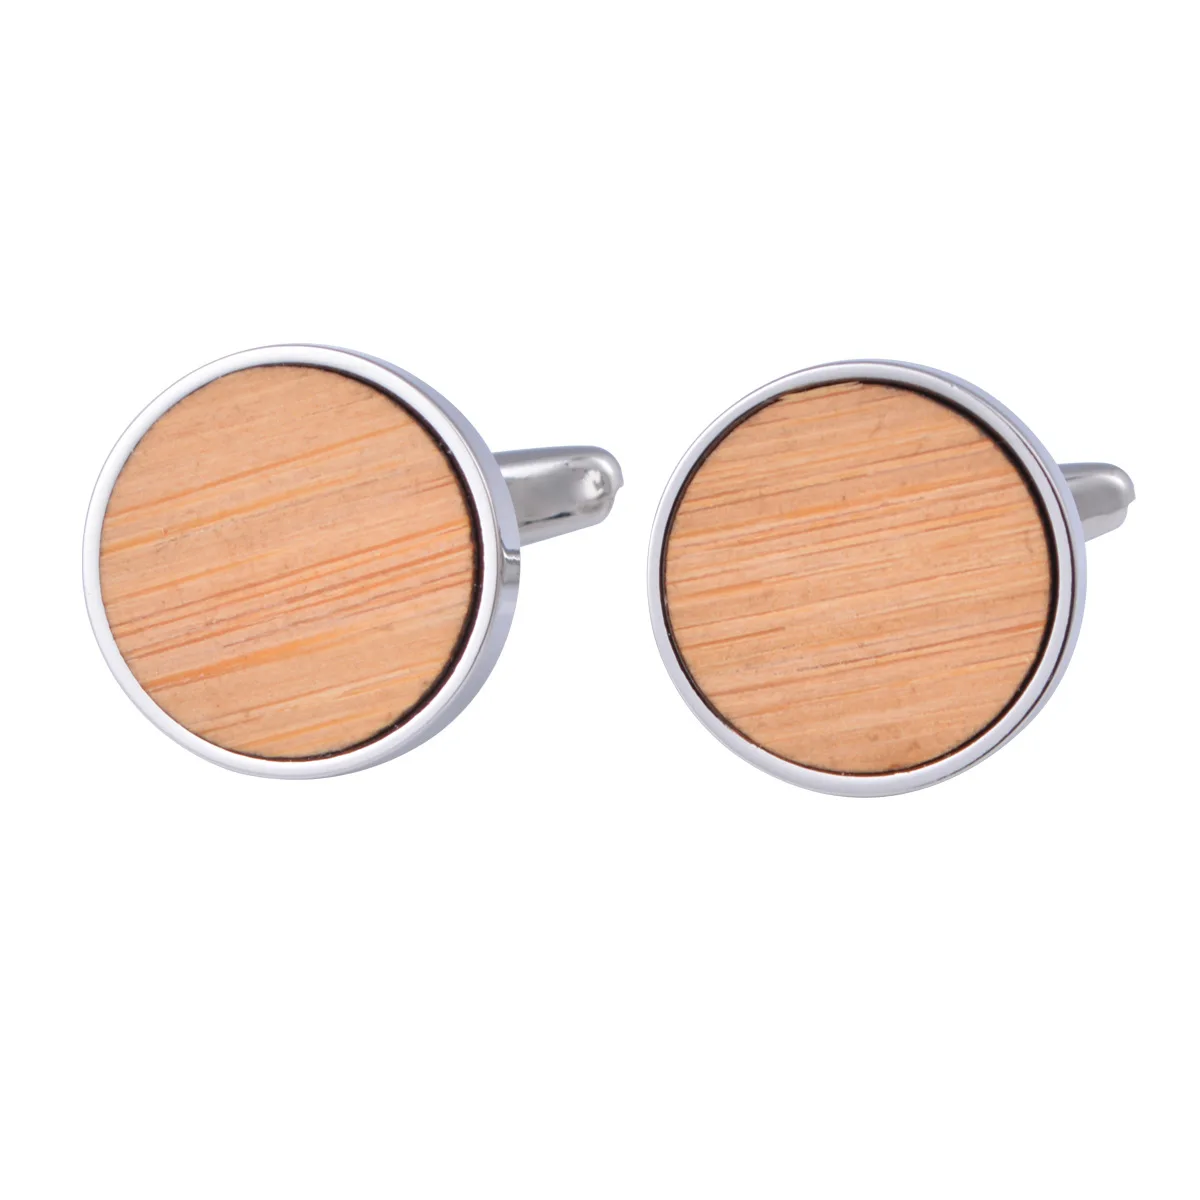 

French Cufflinks Men's Business Banquet Suit Shirt Jewelry Environmental Protection Primary Color Brown Bamboo Round Cuff Links